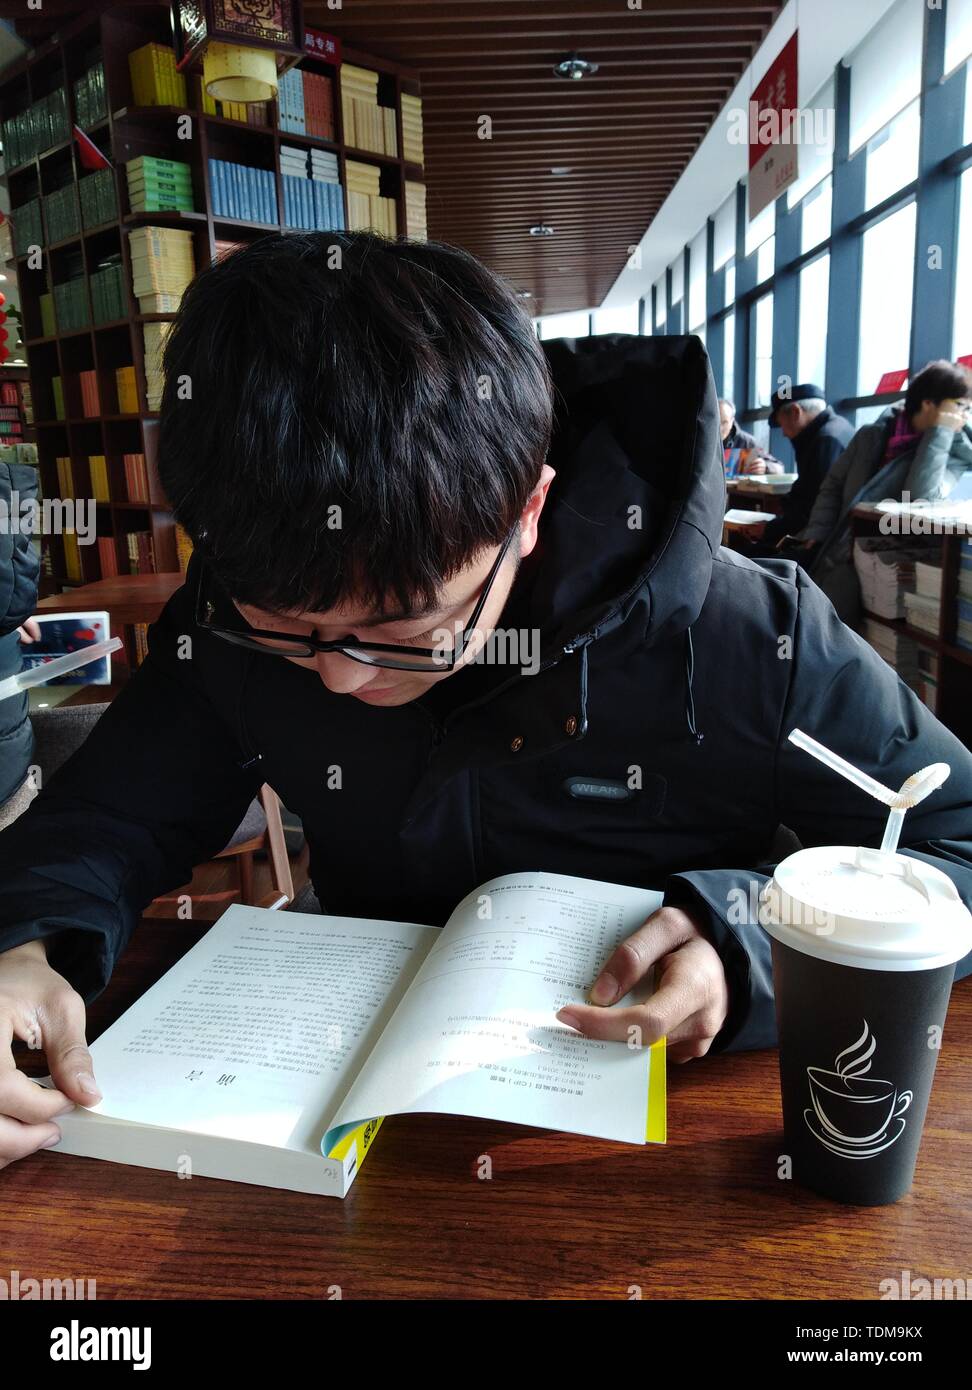 During the winter break, book readers in Xinhua Bookstore Stock Photo